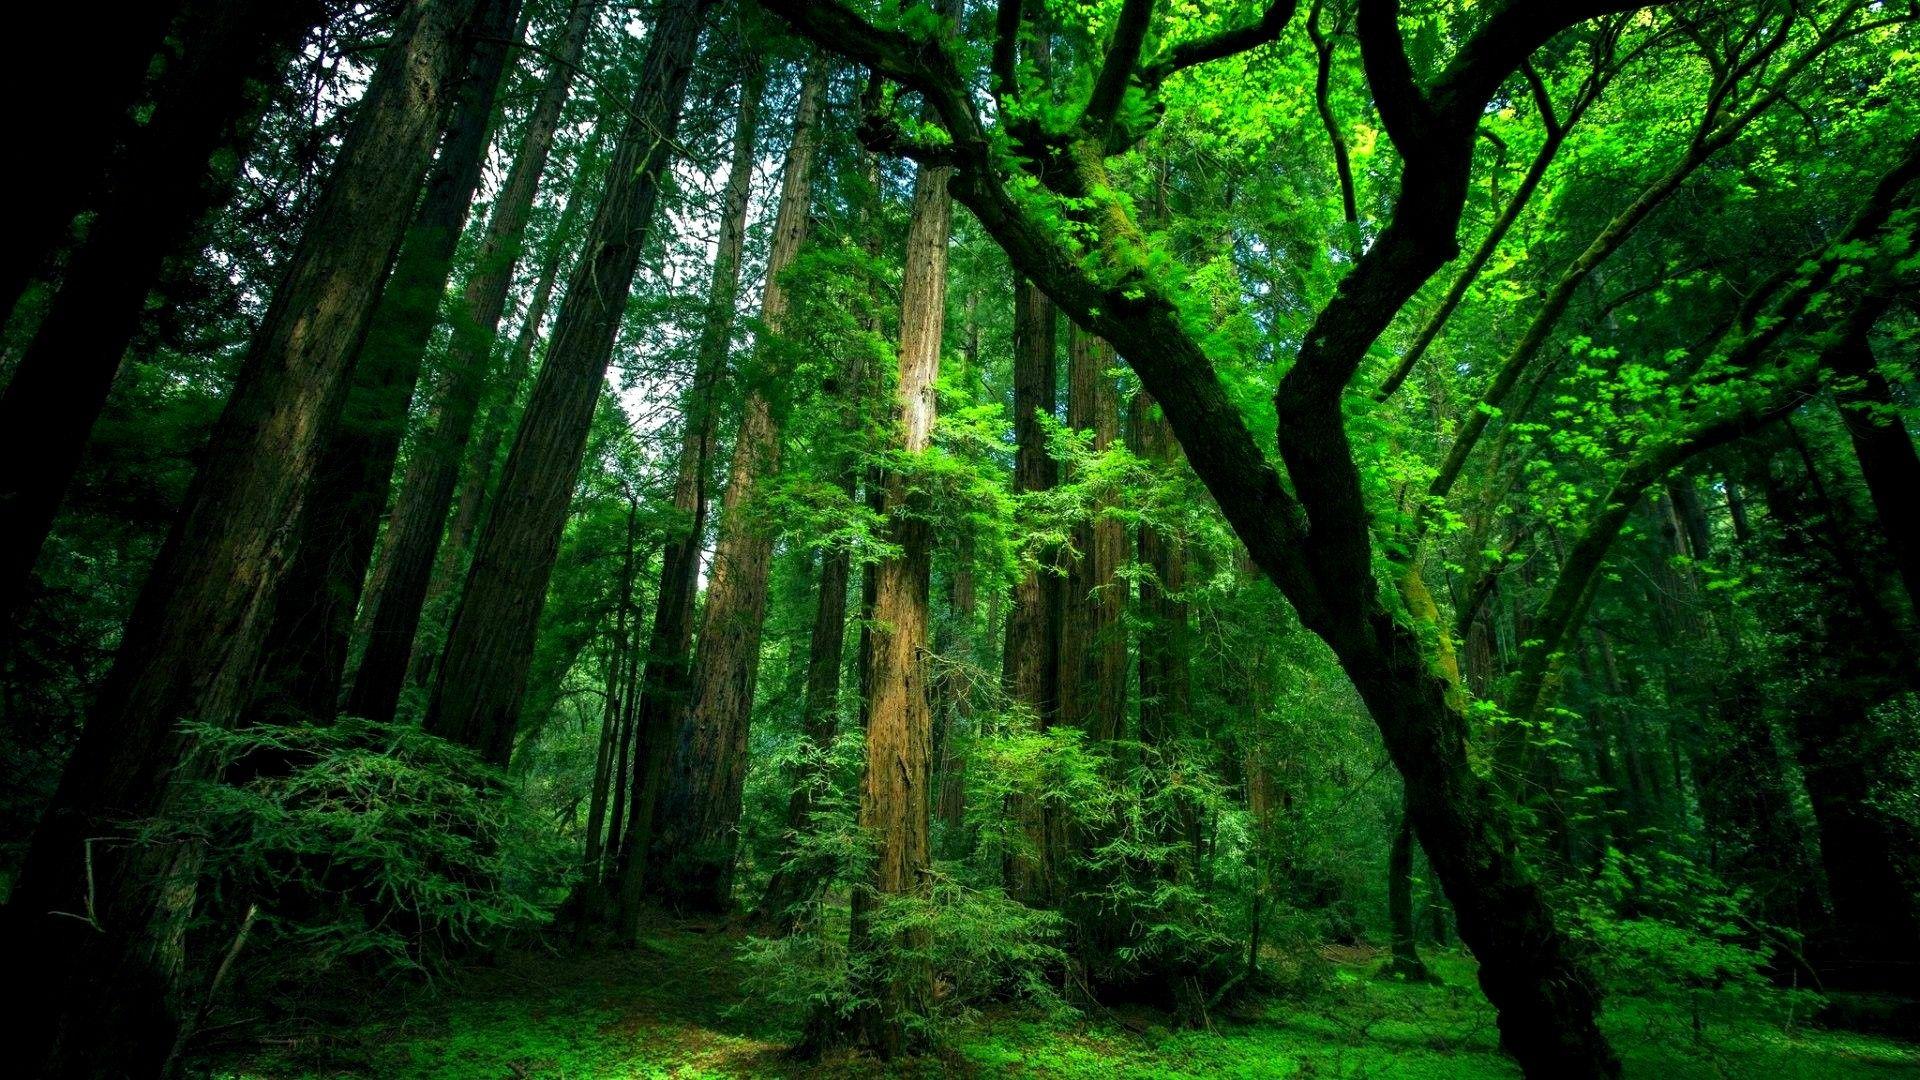 Forest: GREEN FOREST Big Sequoia Trees Wallpaper For Desktop for HD